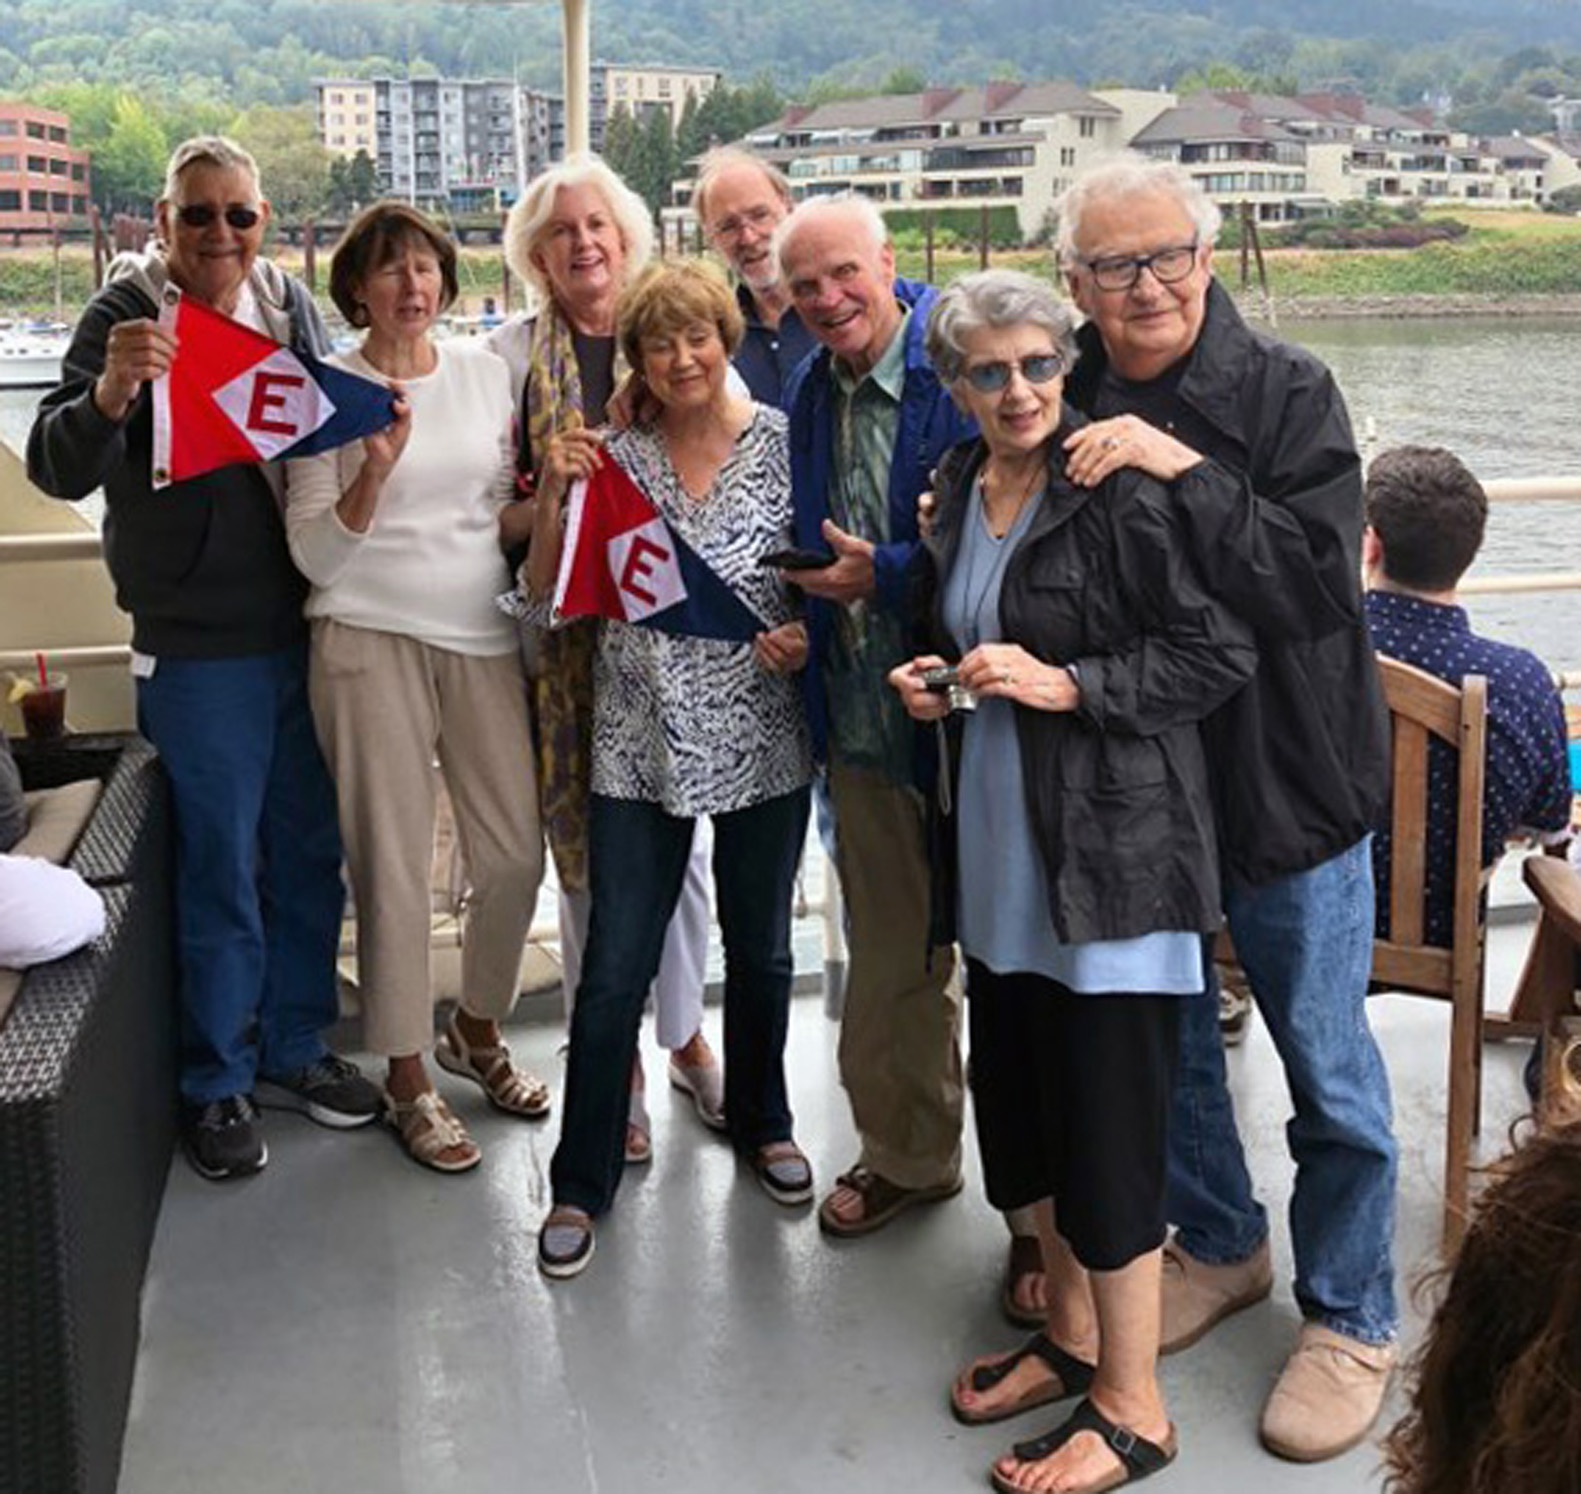  Celebrating Dave and Marji’s 50th wedding anniversary with the Swangards, the Ellsworths, and friends aboard the Portland Spirit on the Willamette River 